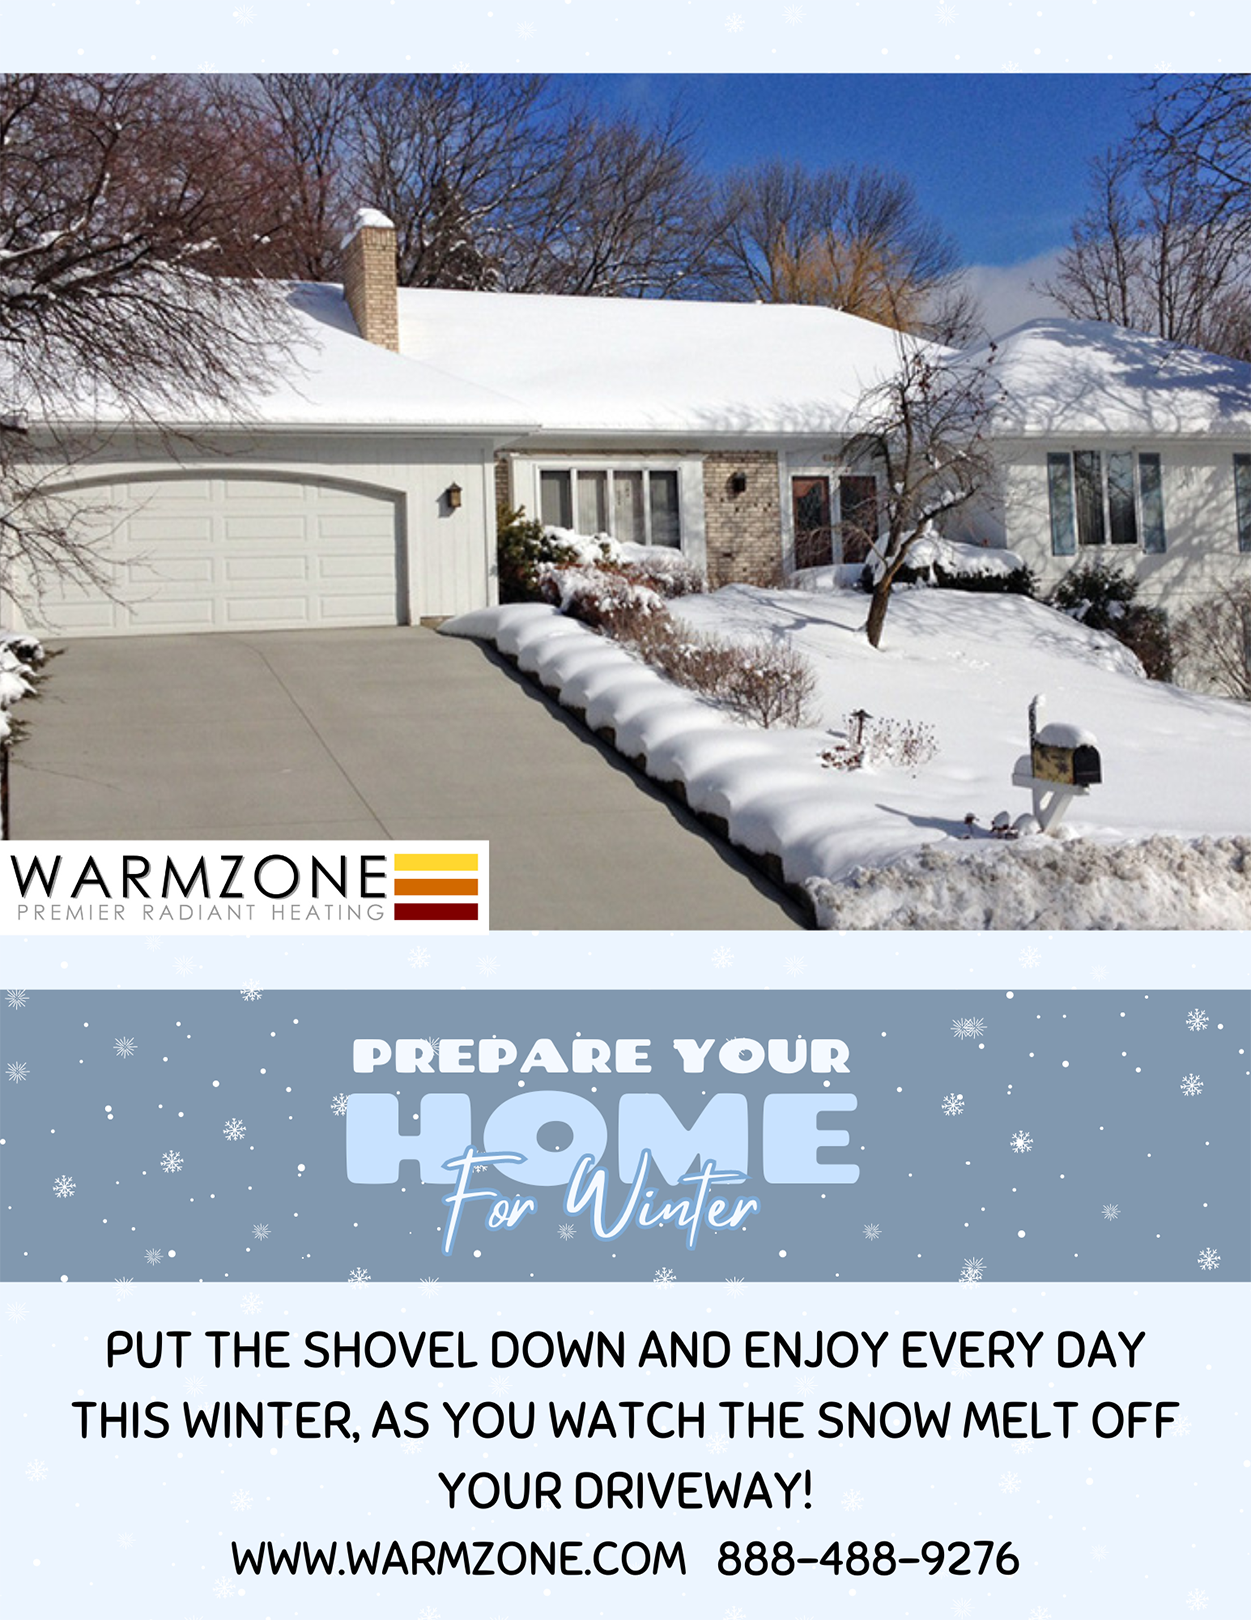 Heated driveways - prepare your home for winter, lifestyles ad.